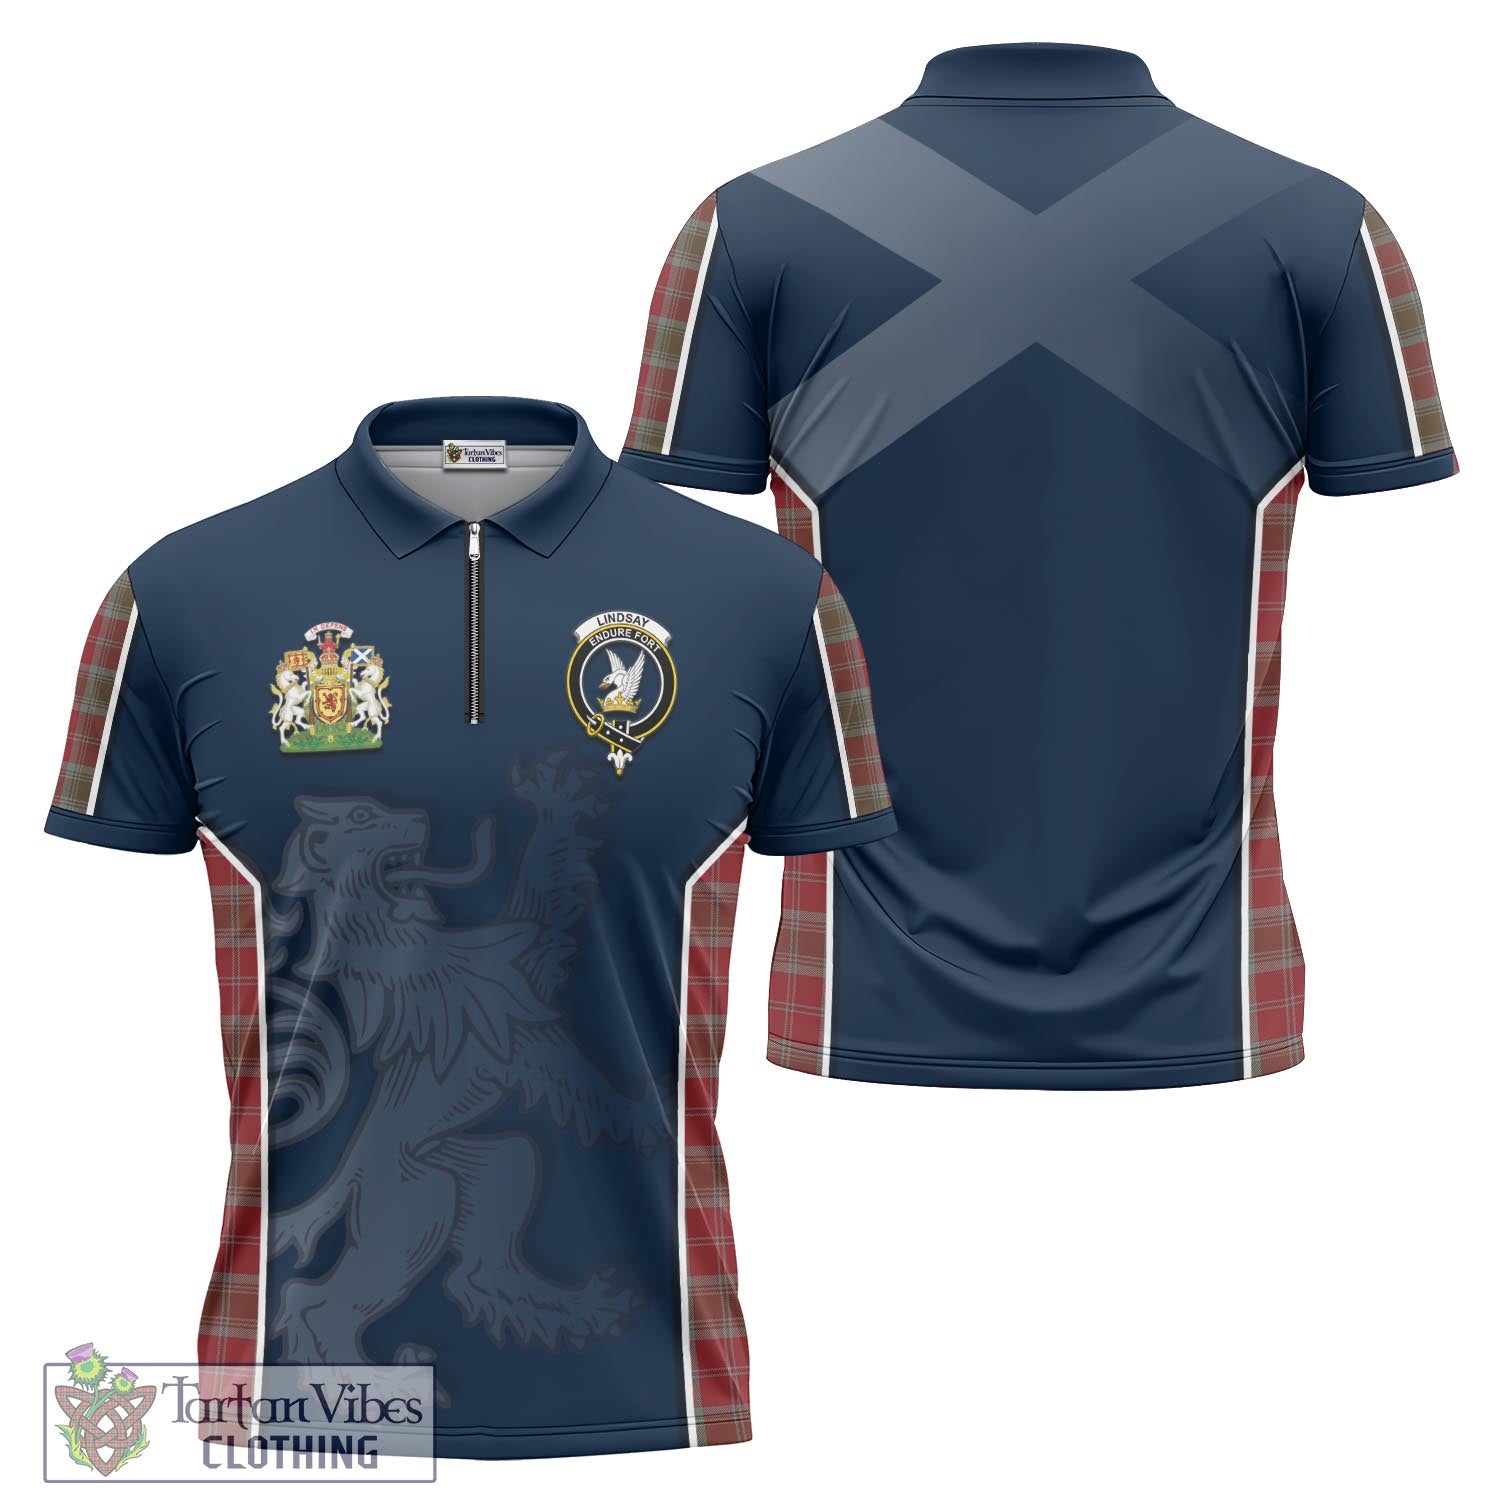 Tartan Vibes Clothing Lindsay Weathered Tartan Zipper Polo Shirt with Family Crest and Lion Rampant Vibes Sport Style